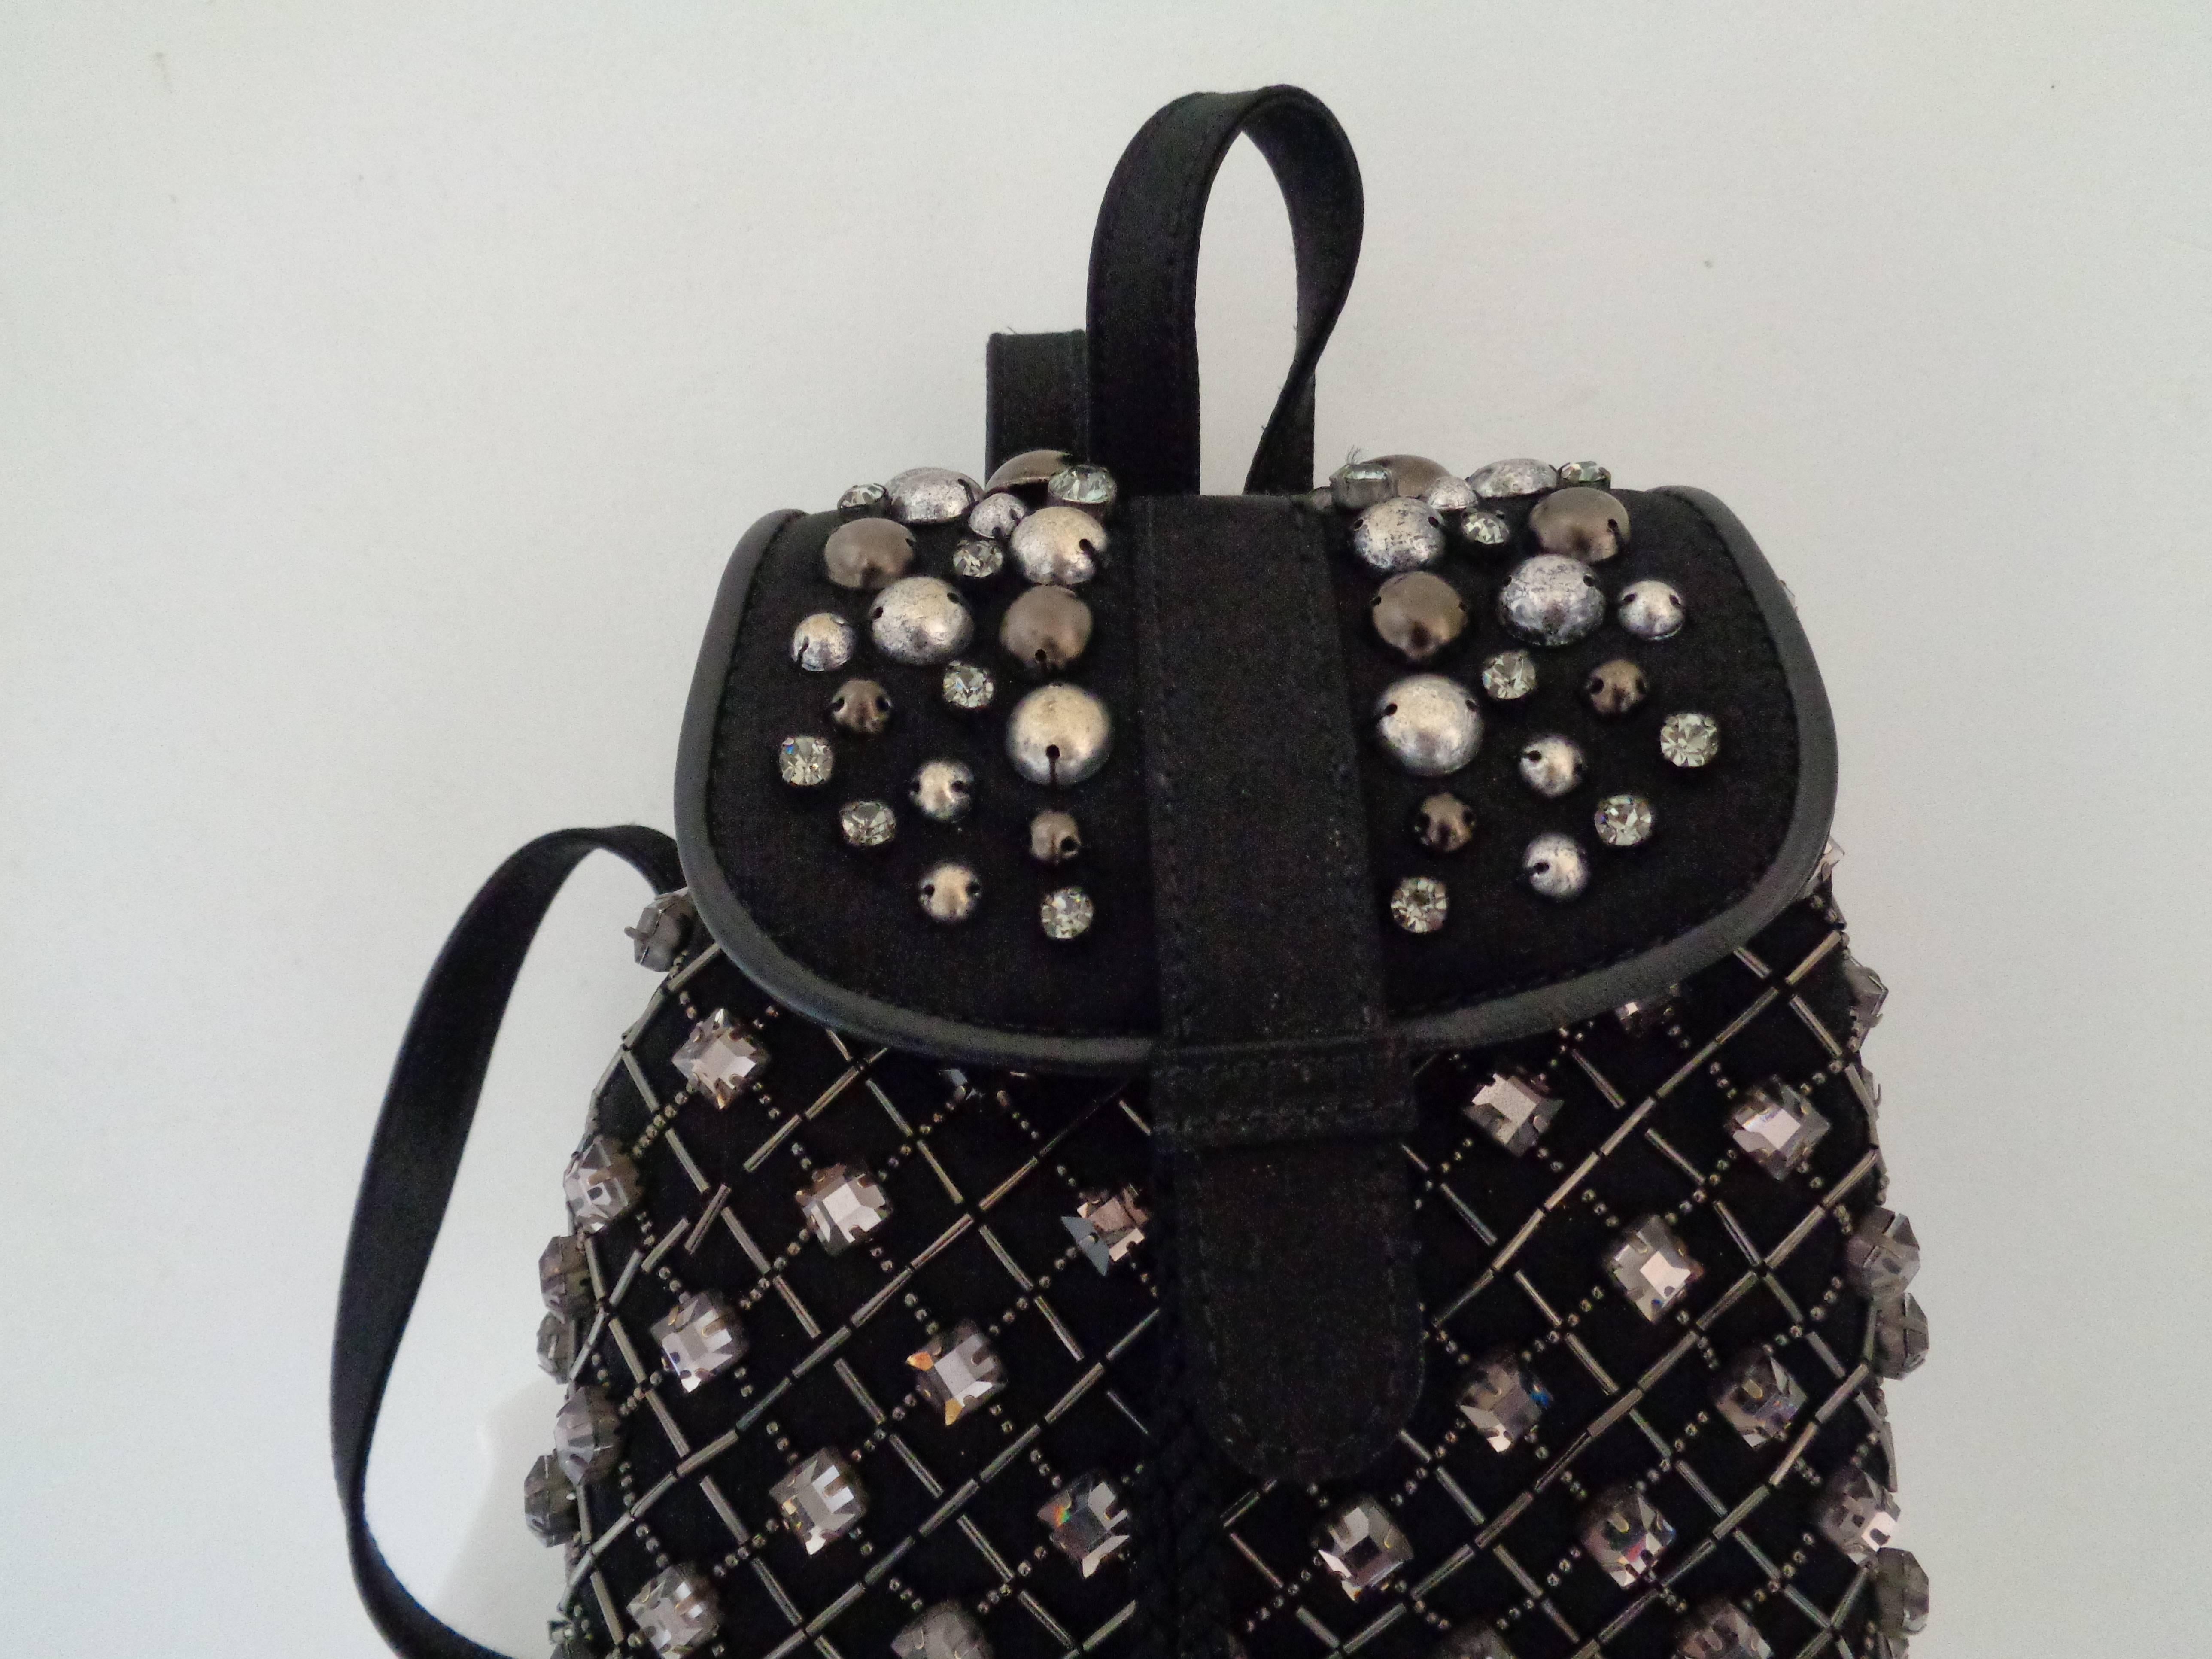 Alberta Ferretti Black with Swarovski Backpack NWOT

Geometric pattern jewel backpack

totally made in italy

Comes with dust bag

